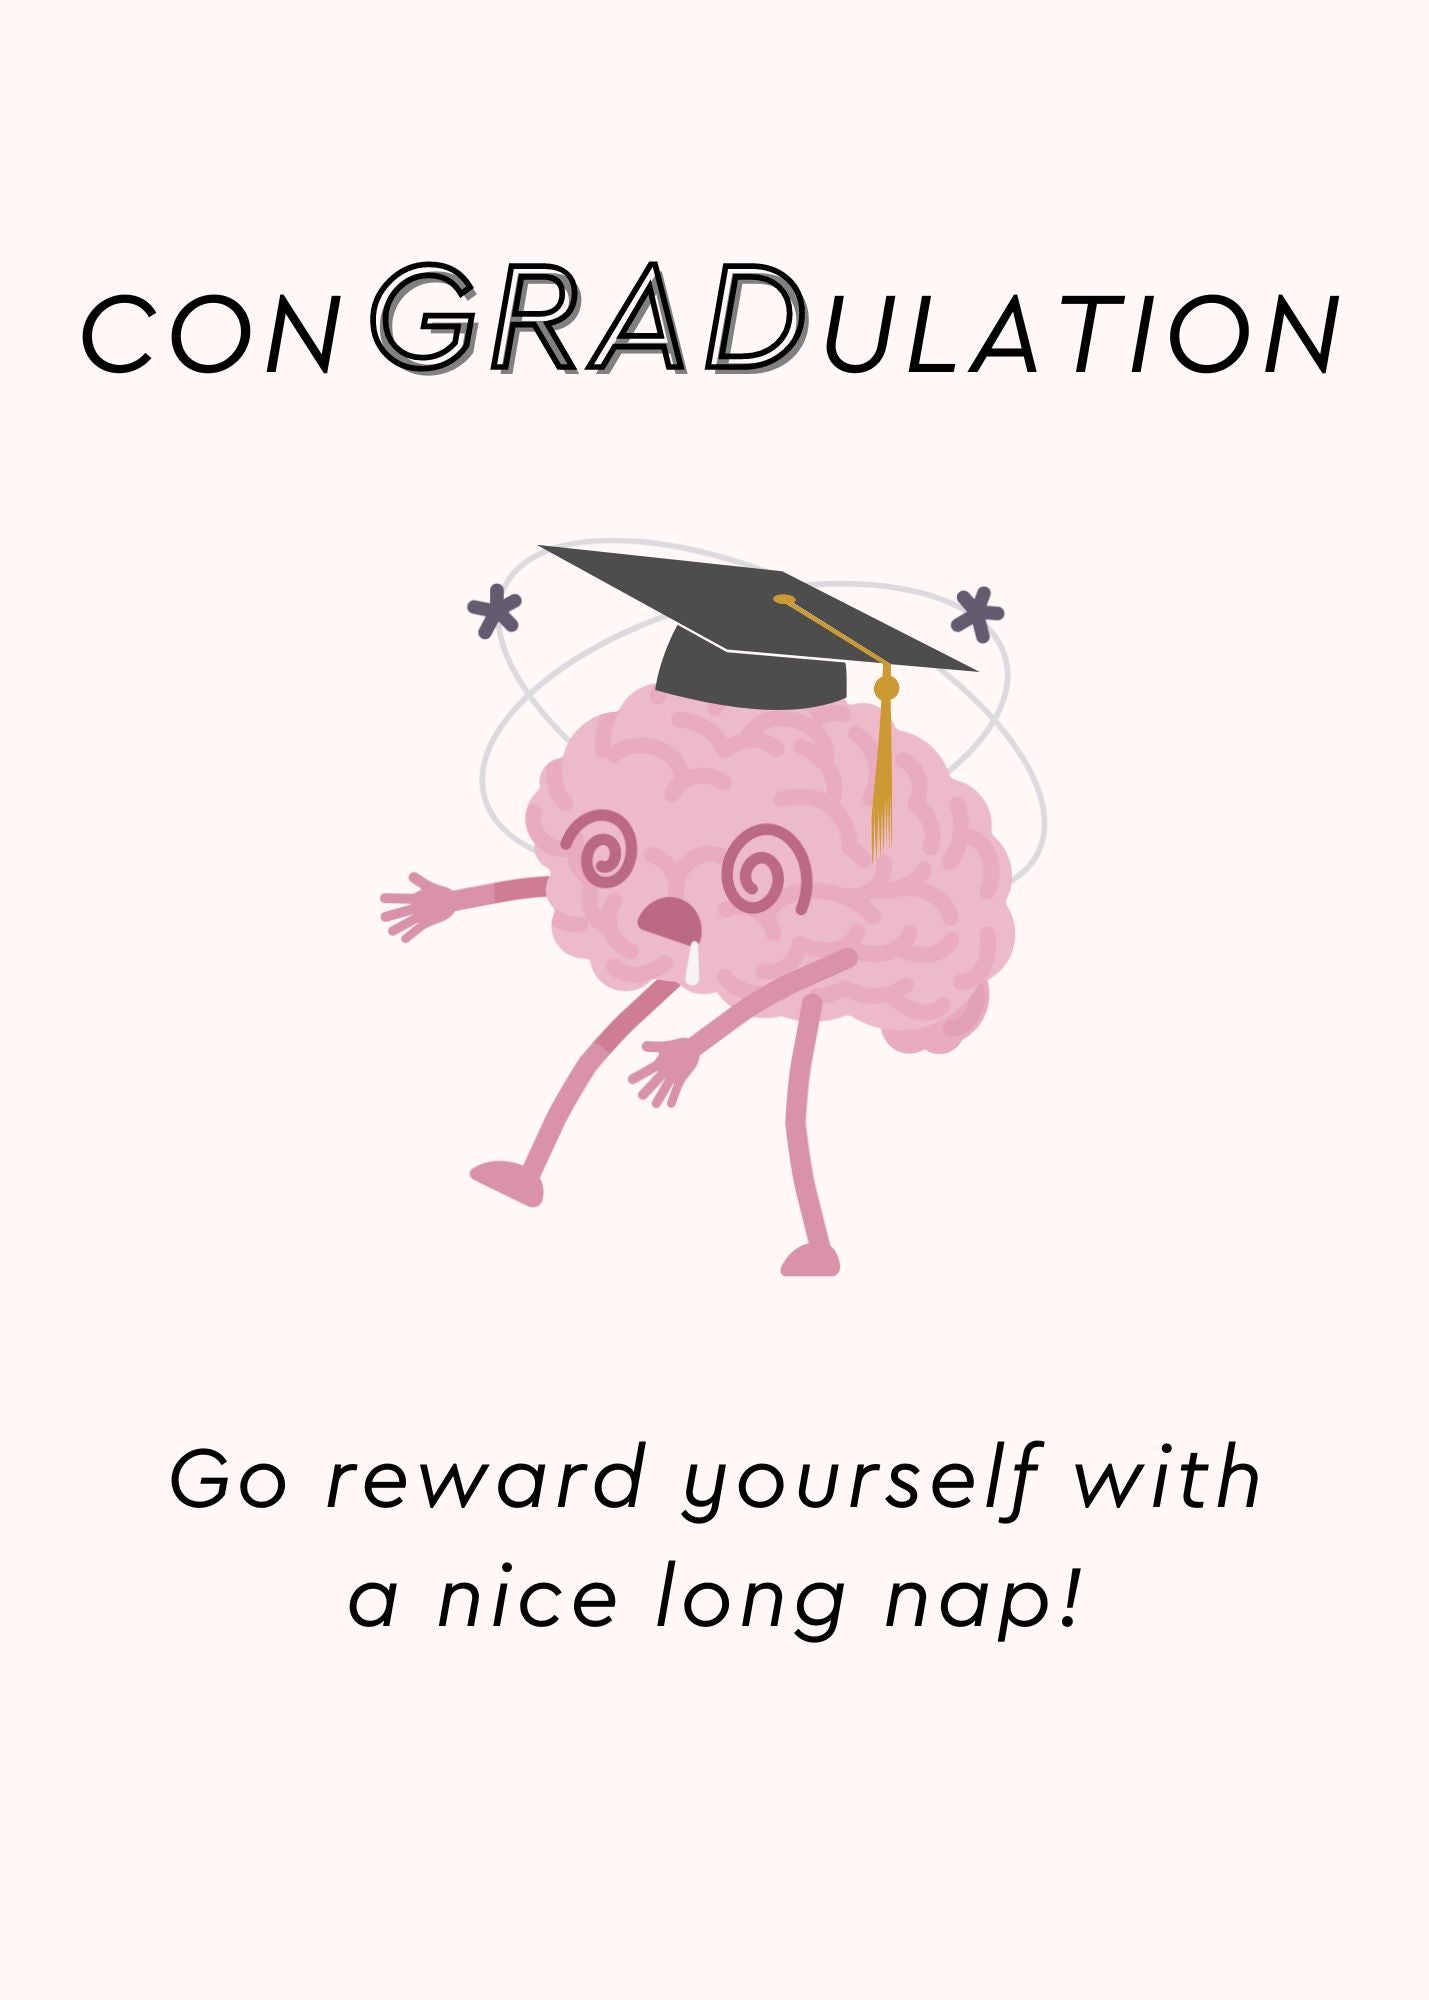 Humorous graduation card template featuring a cartoon brain wearing a graduation cap with funny graduation card messages.